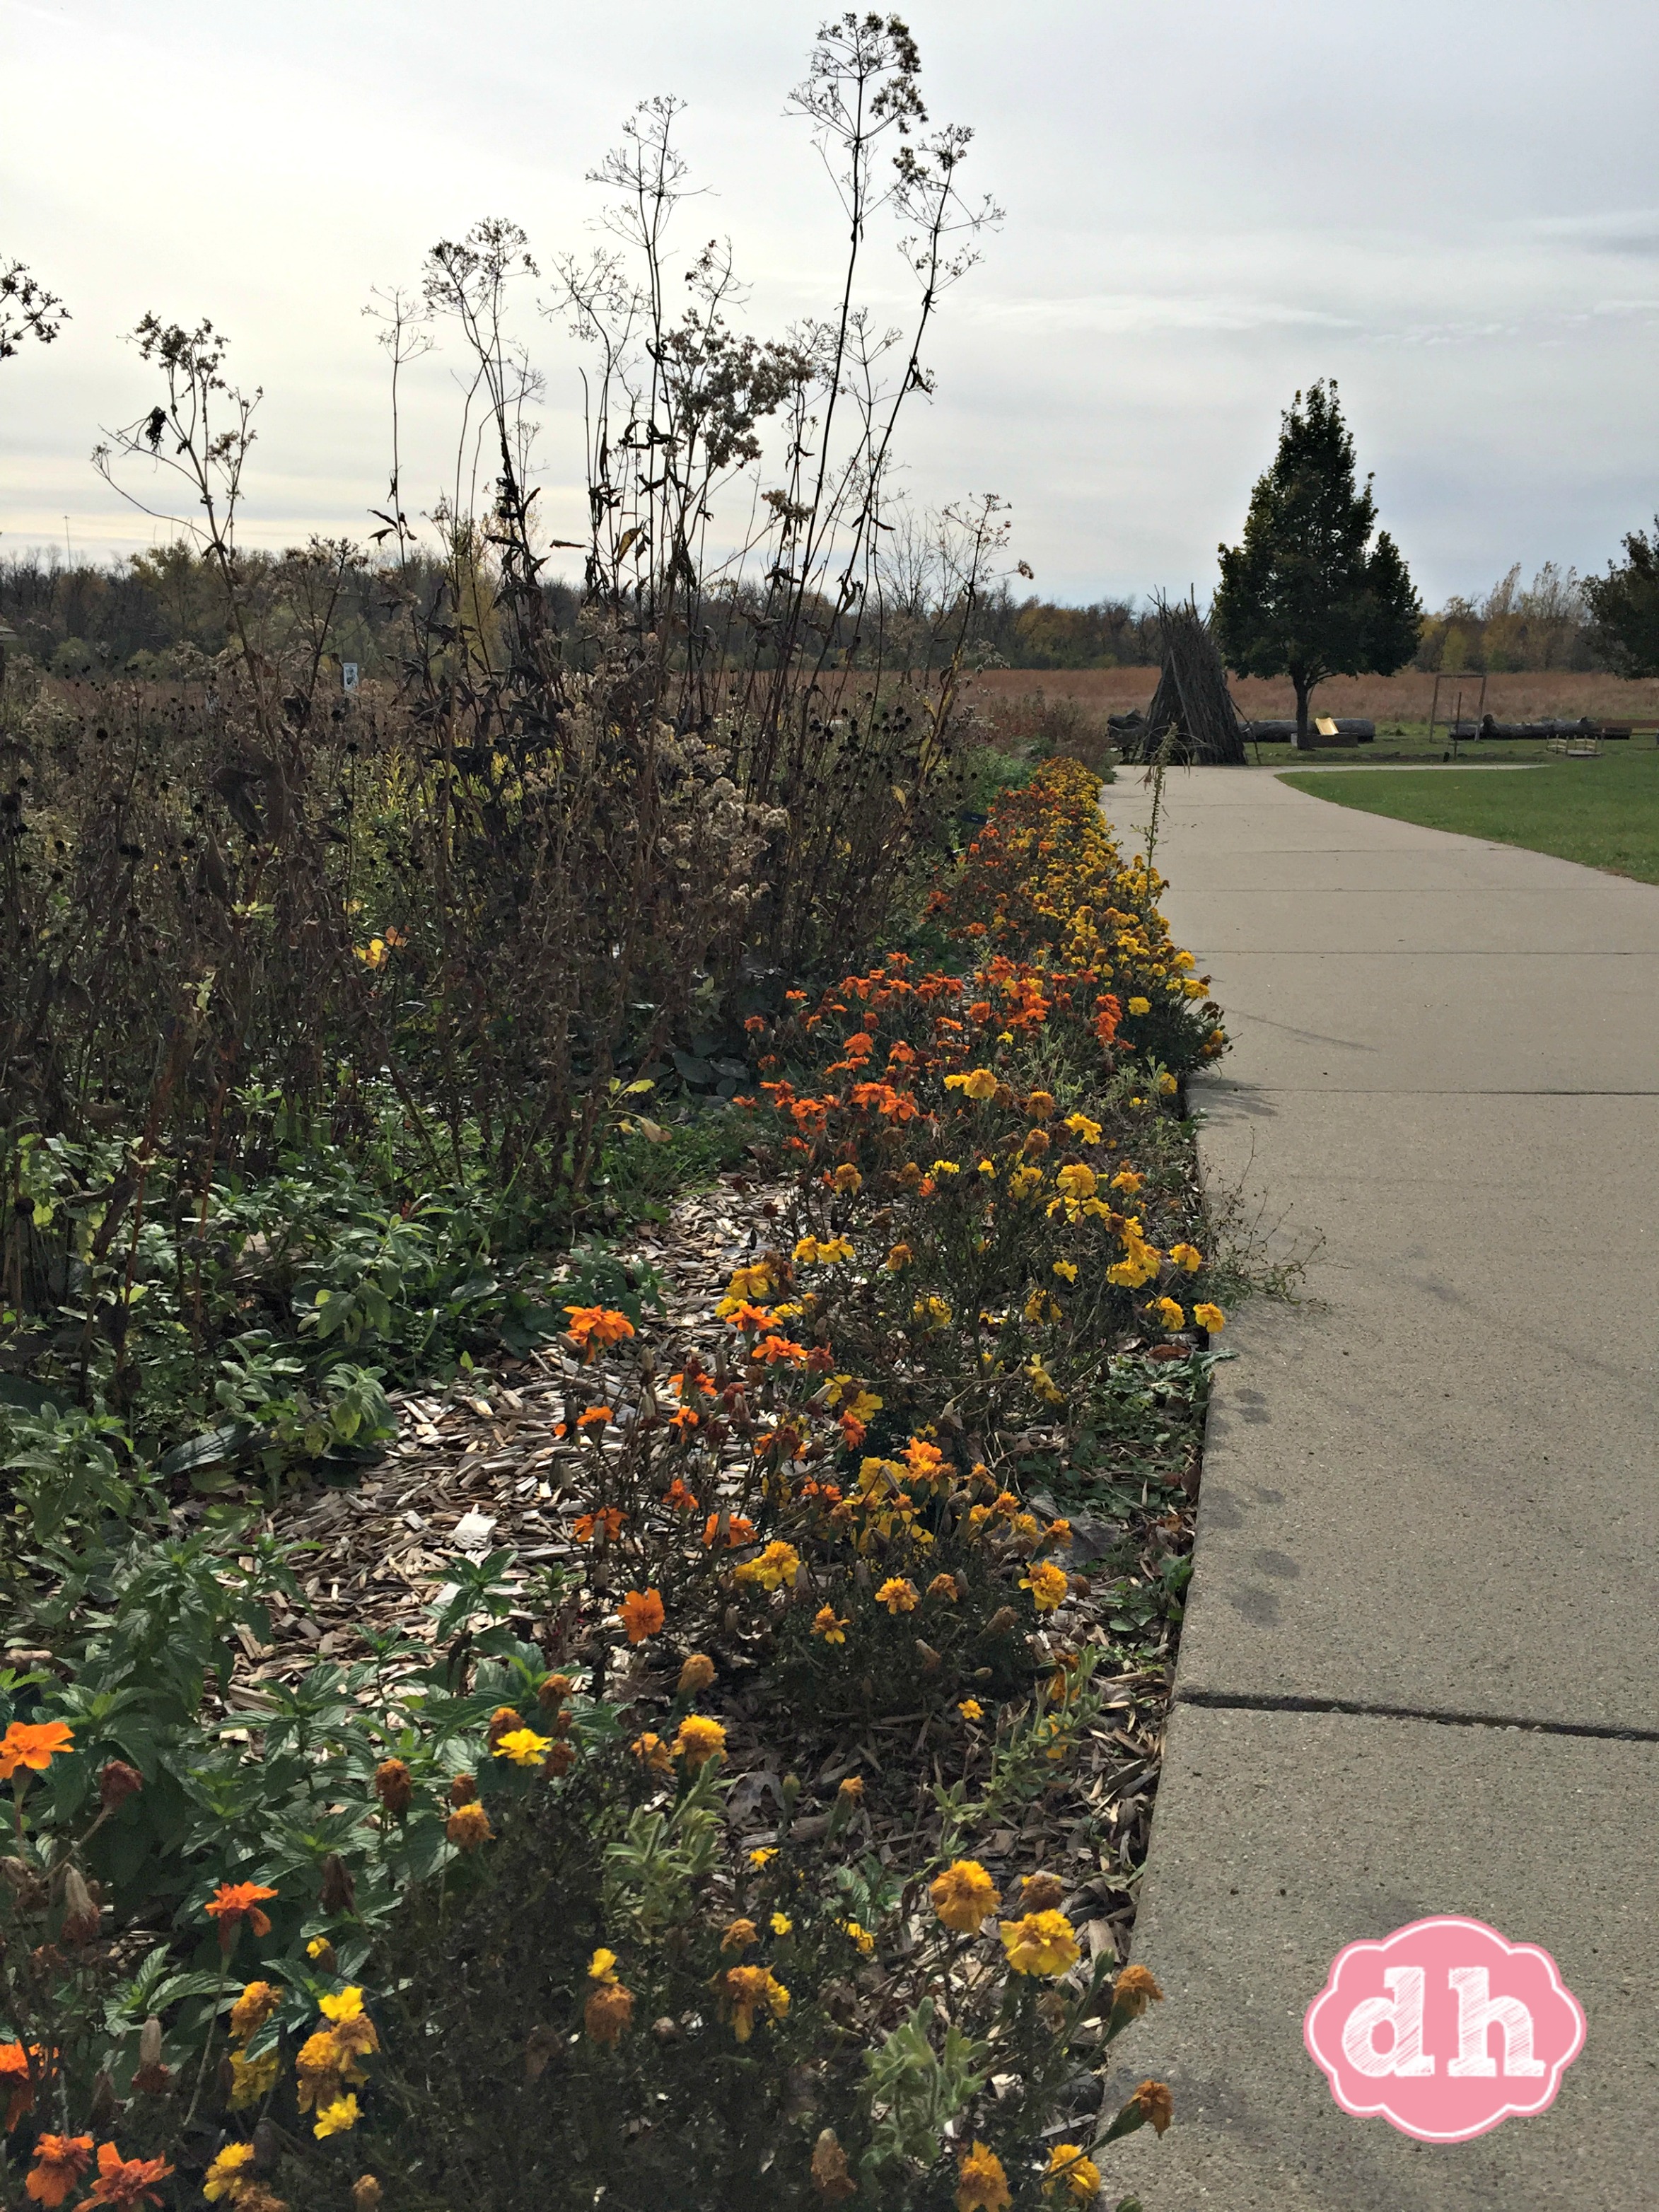 Outdoor Campus in Sioux Falls #VisitSiouxFalls #travel